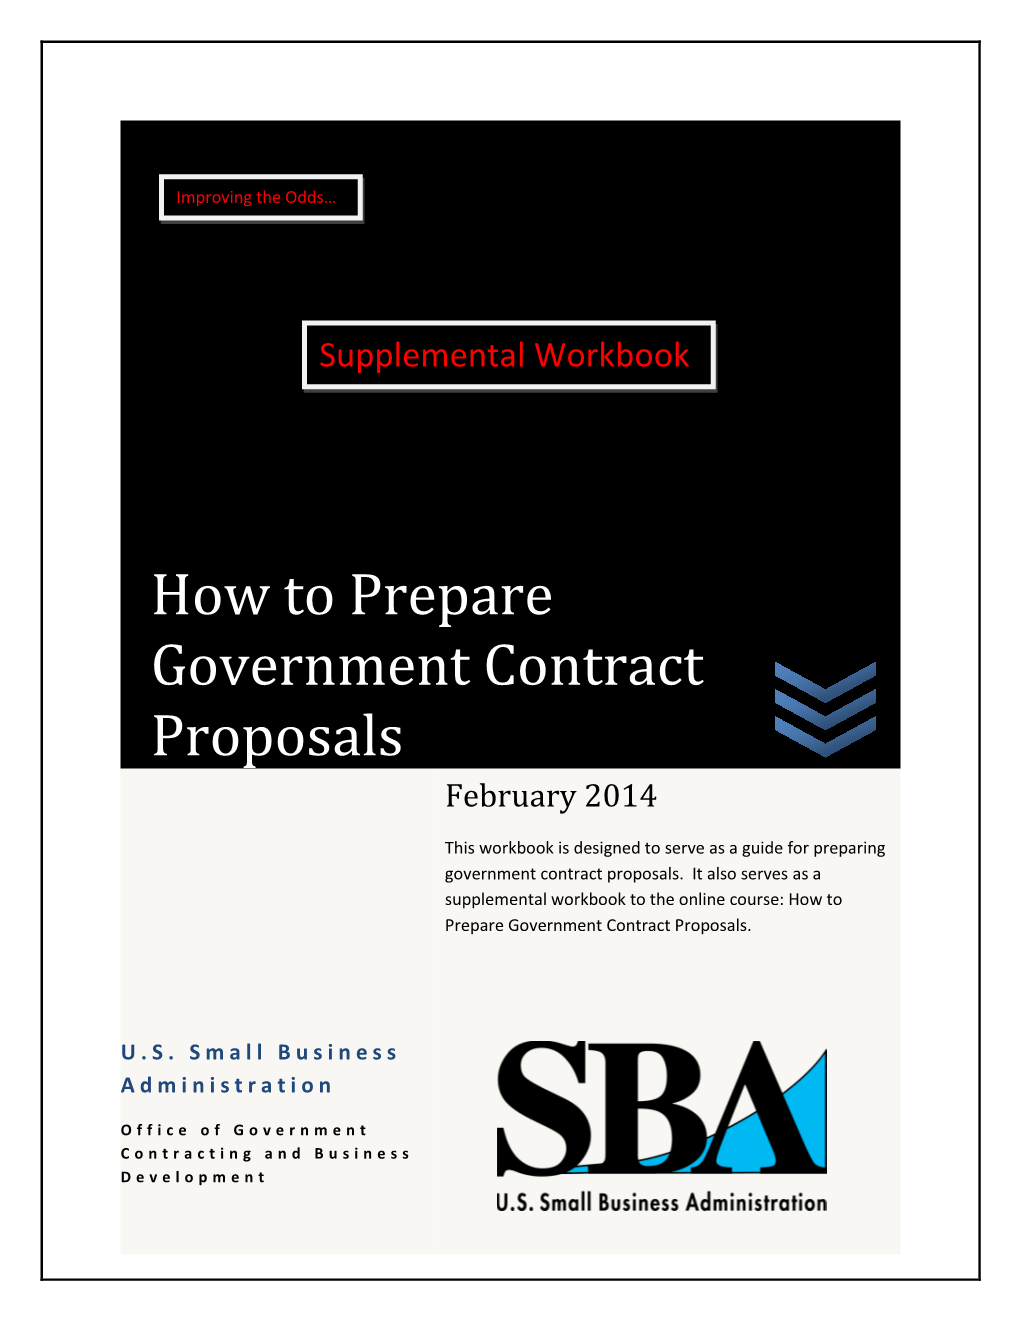 How to Prepare Government Contract Proposals February 2014